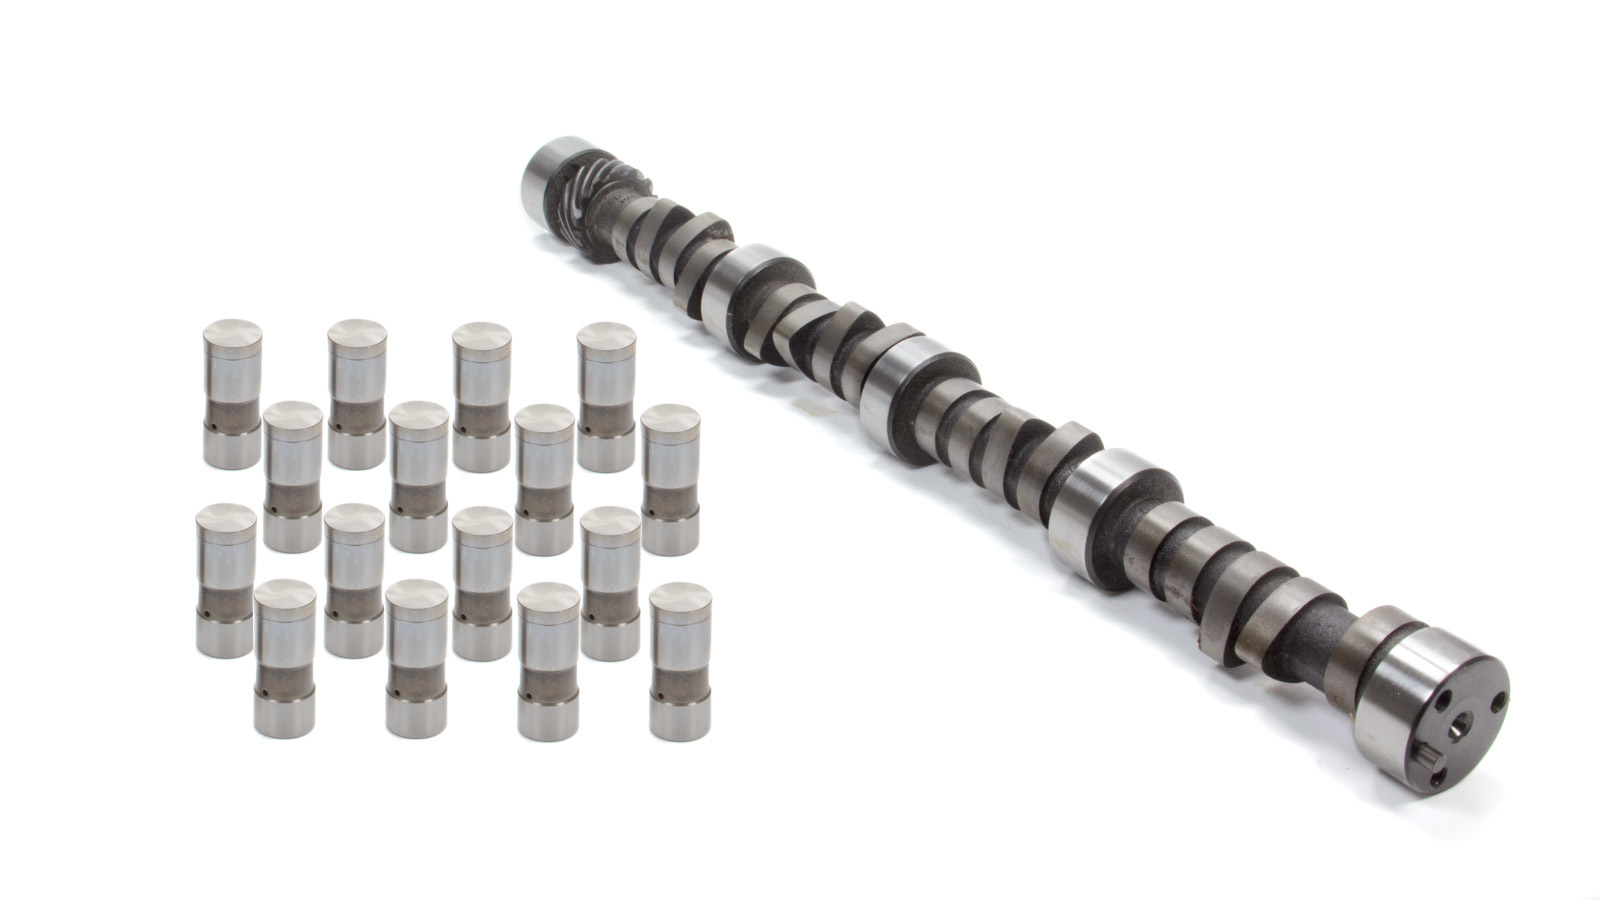 Elgin CL-1788PK Camshaft / Lifters, Street Performance, Hydraulic Flat Tappet, Lift 0.467 / 0.467 in, Duration 280 / 280, 115 LSA, 2000 / 4800 RPM, Small Block Chevy, Kit